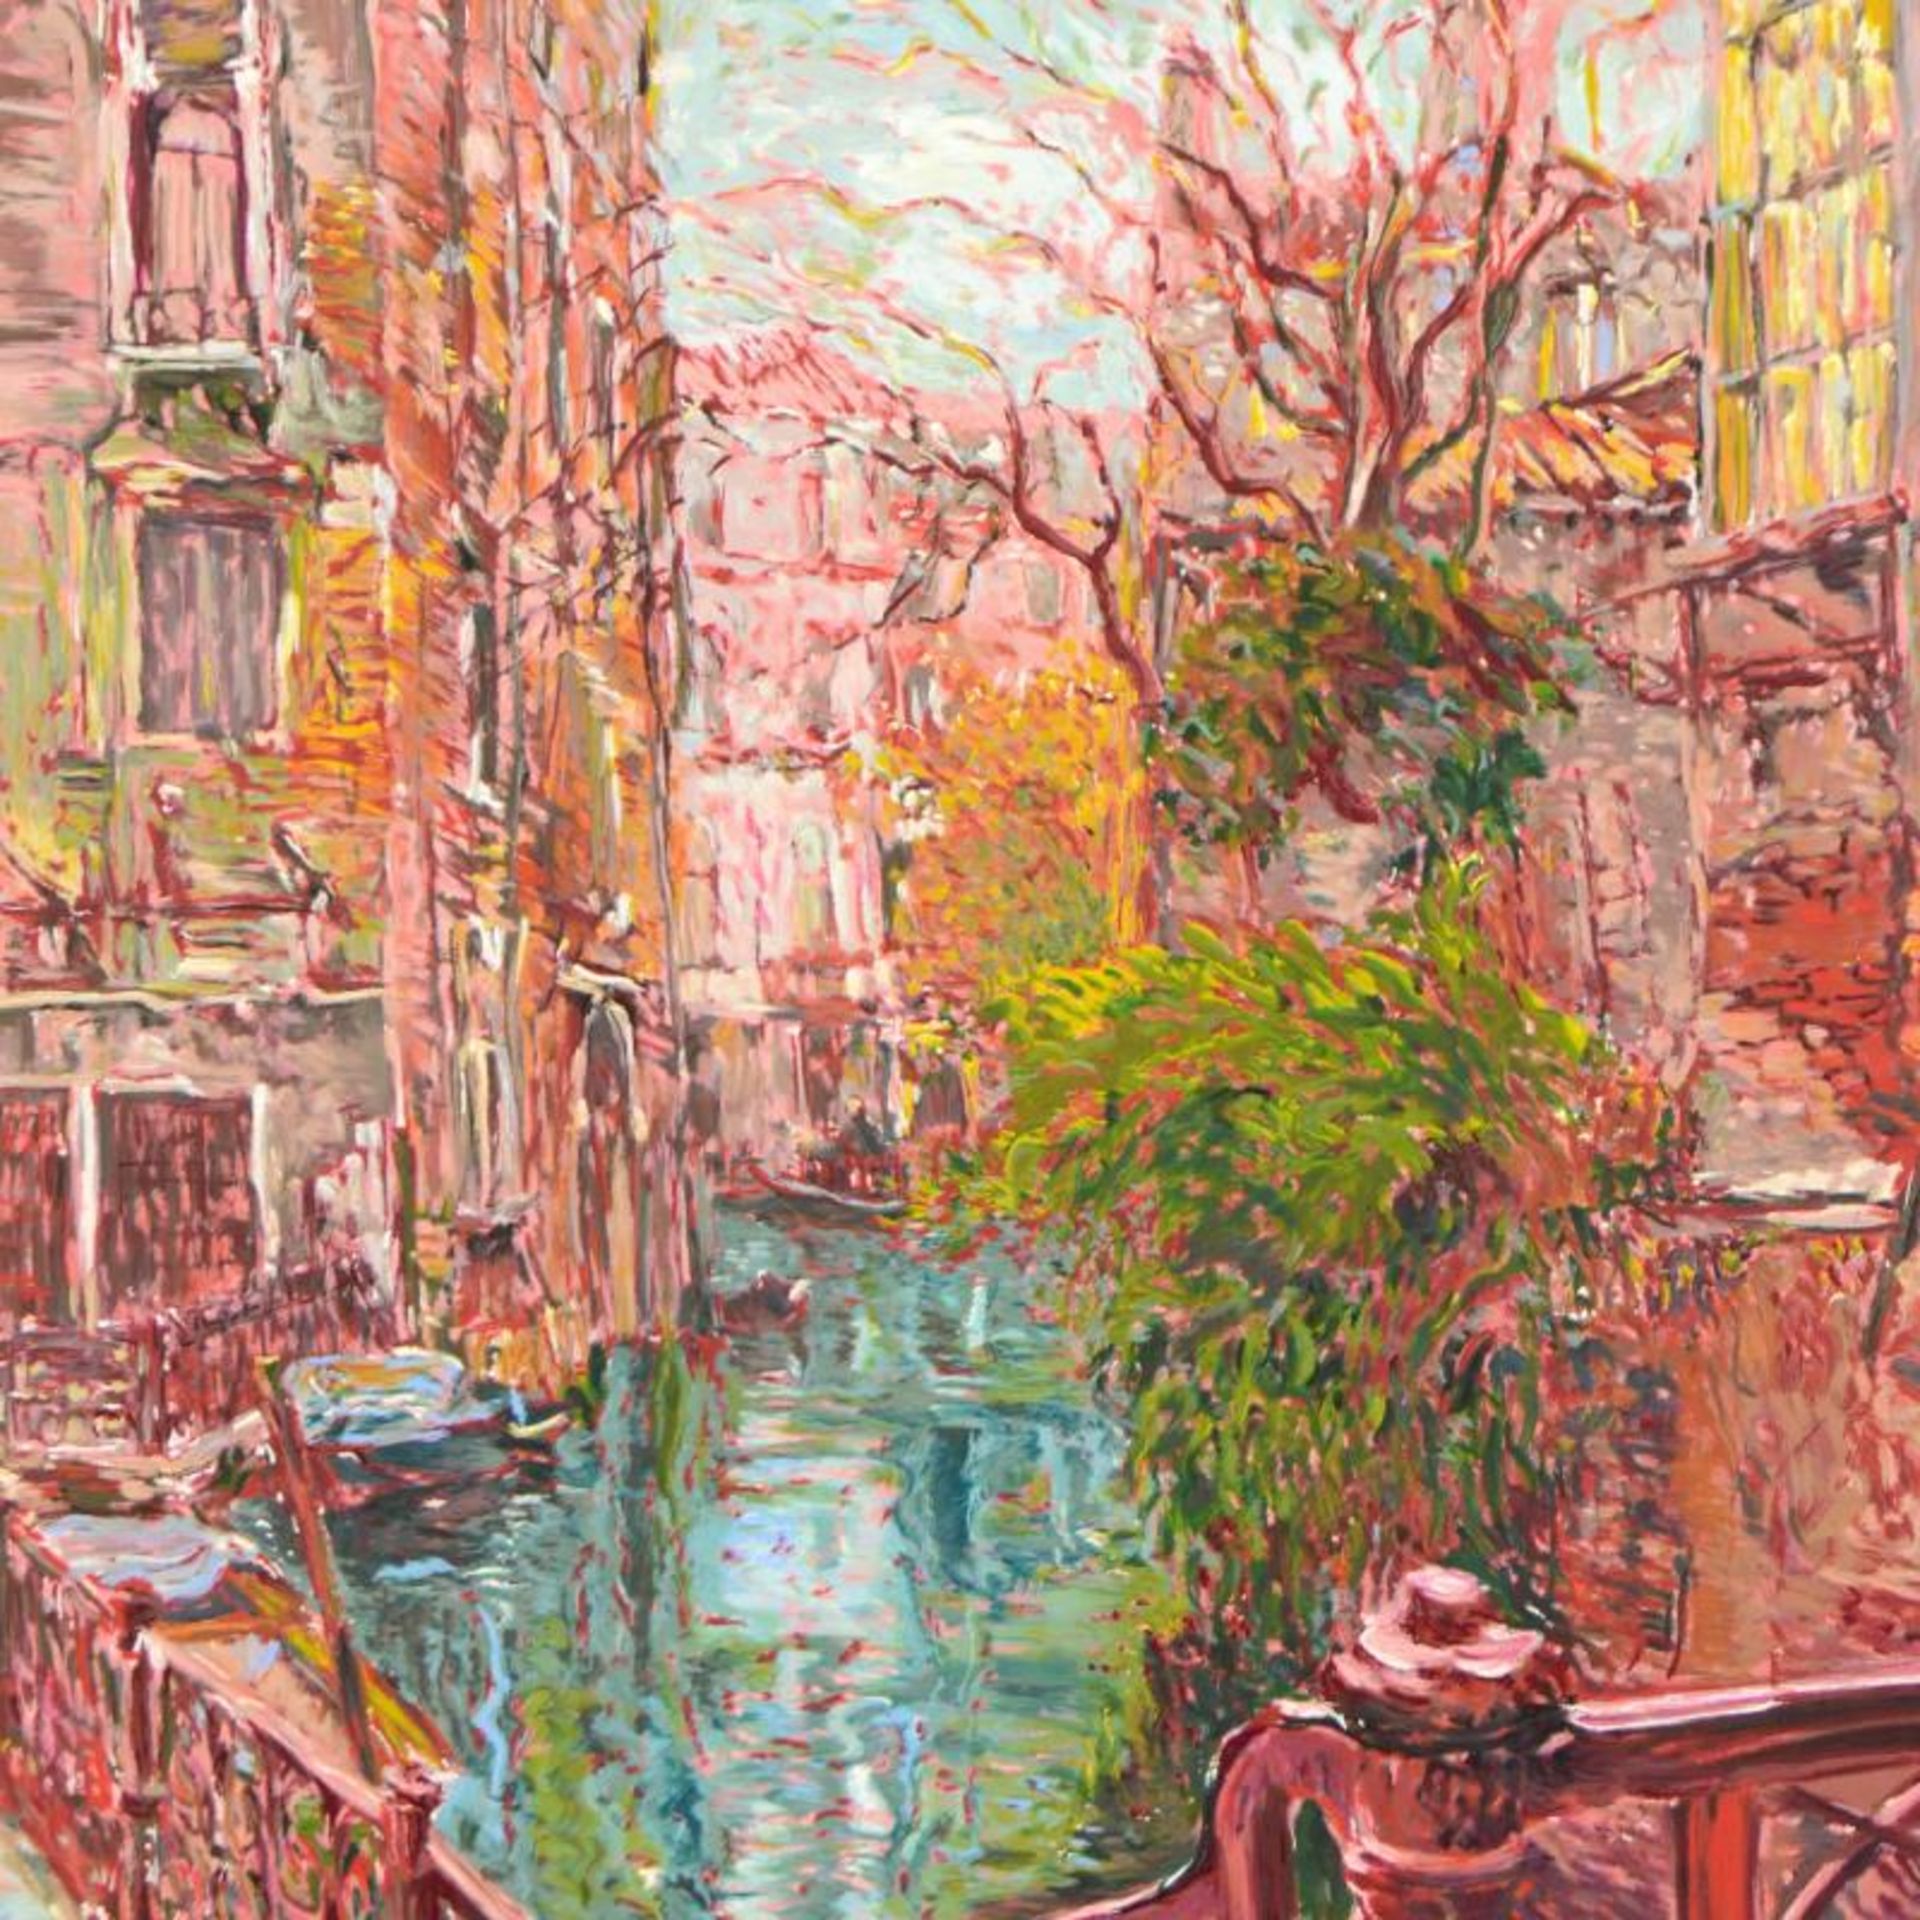 Marco Sassone, "Venice Reflections" Limited Edition Serigraph (32" x 40"), Numbe - Image 2 of 2